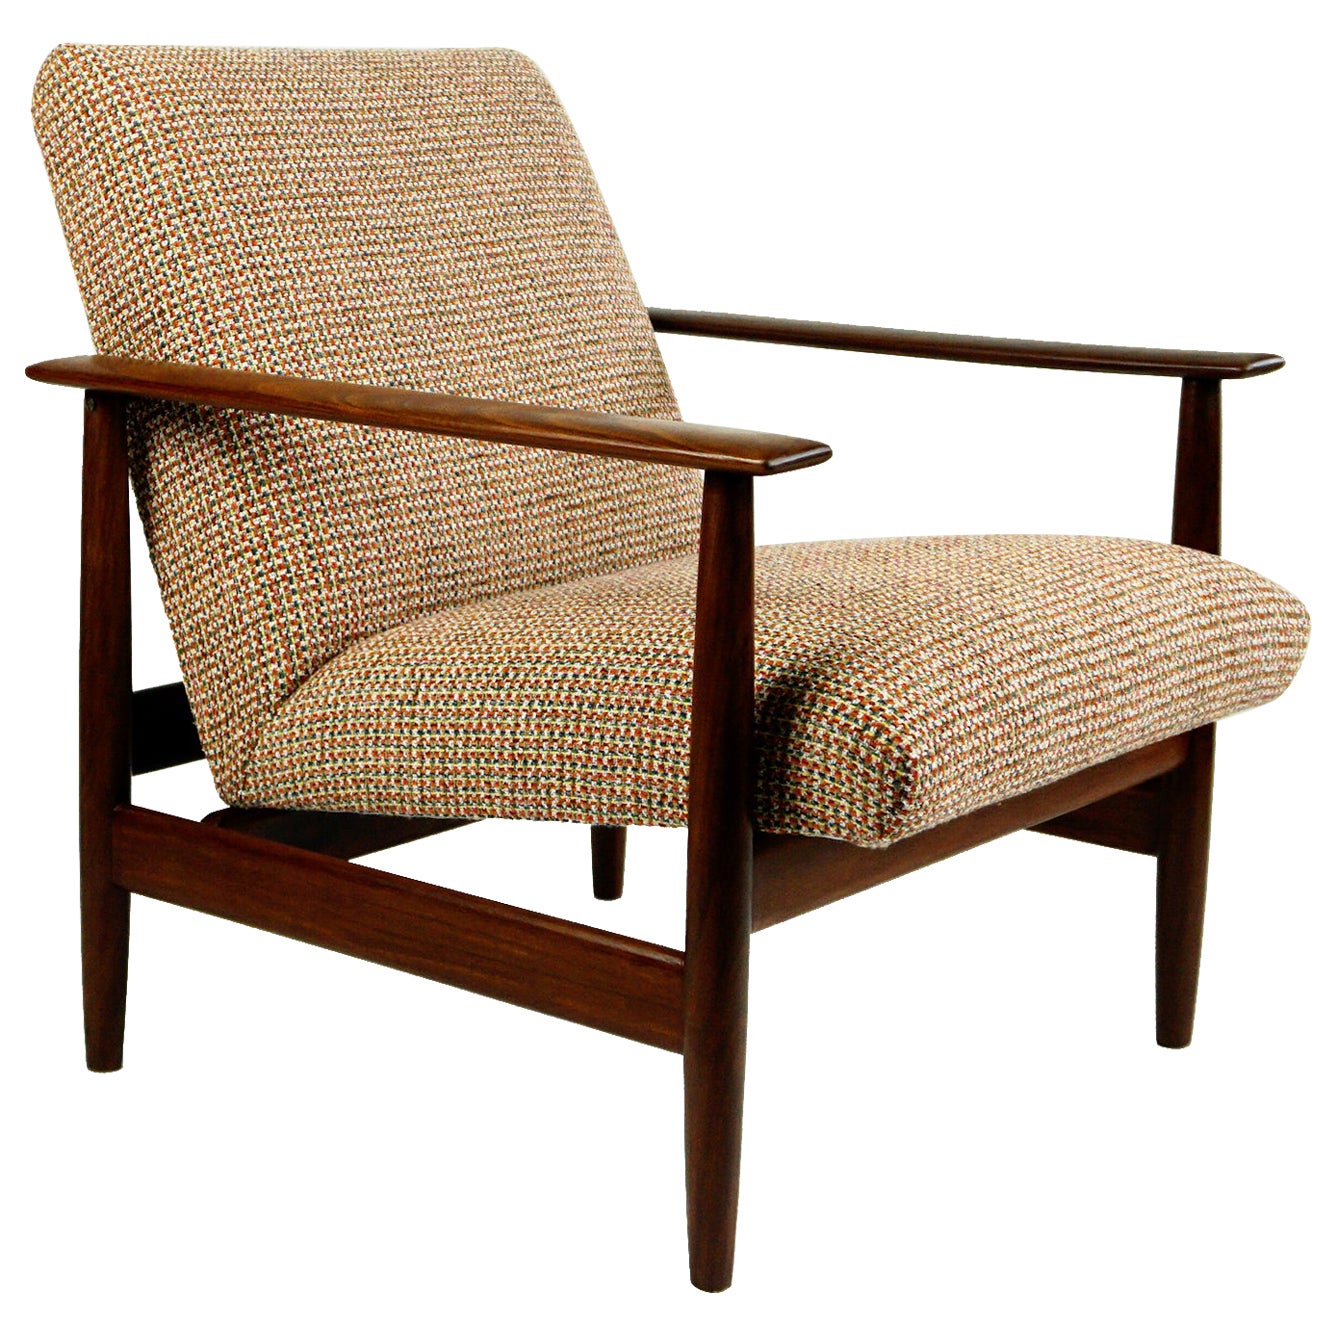 Midcentury Mahogany and New Fabric Lounge Chair by Knoll Antimott, Germany